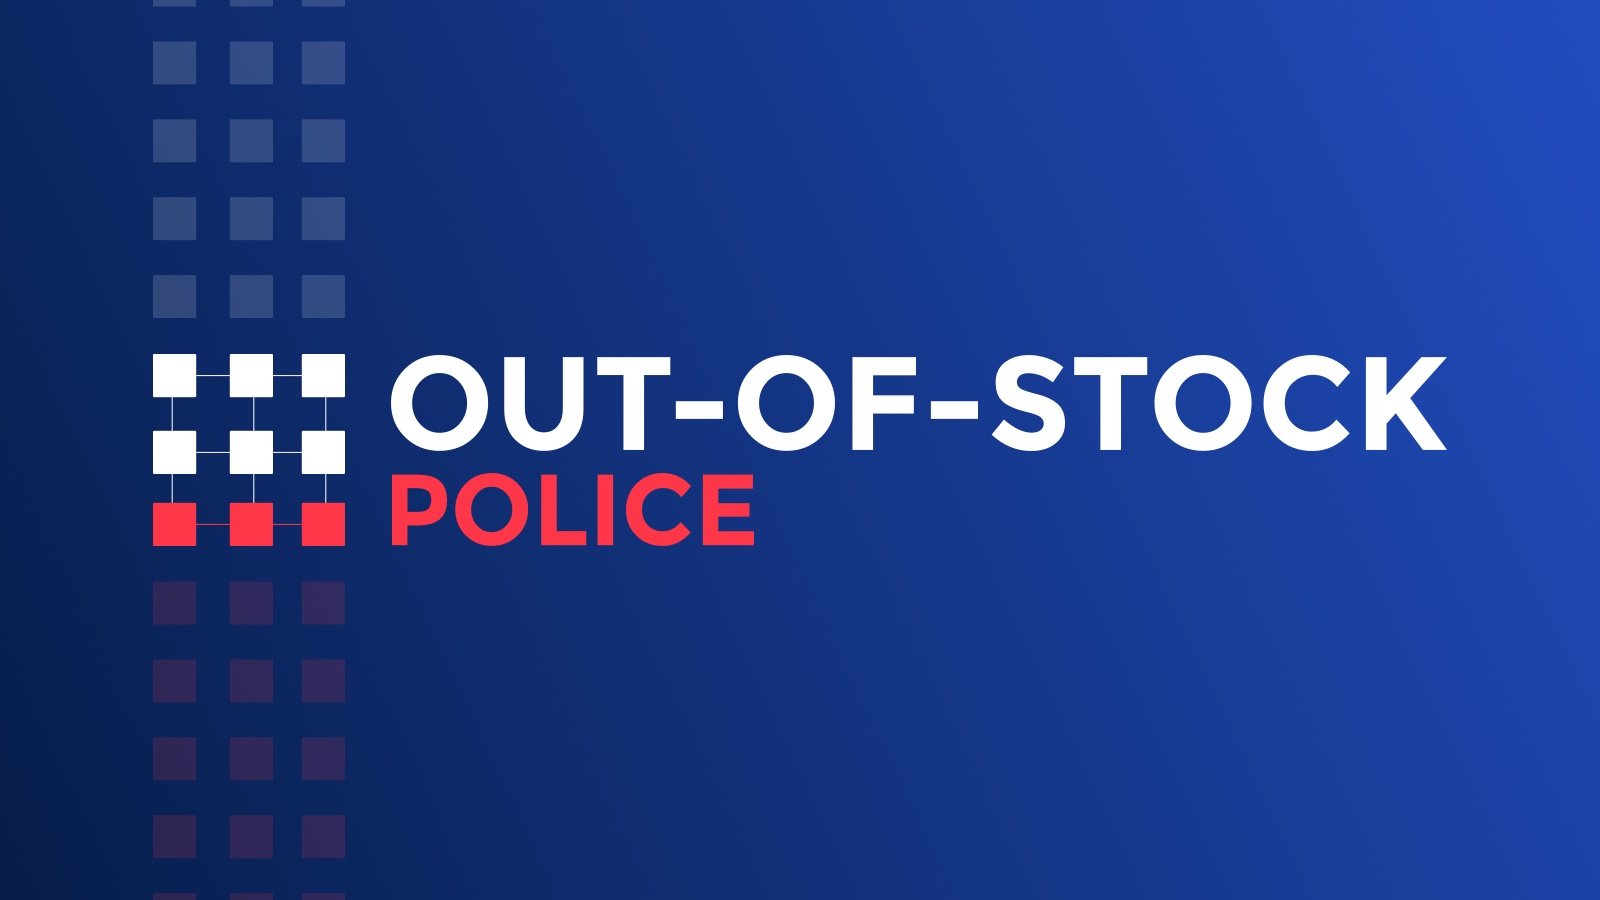 Out-of-Stock Police Shopify App Banner